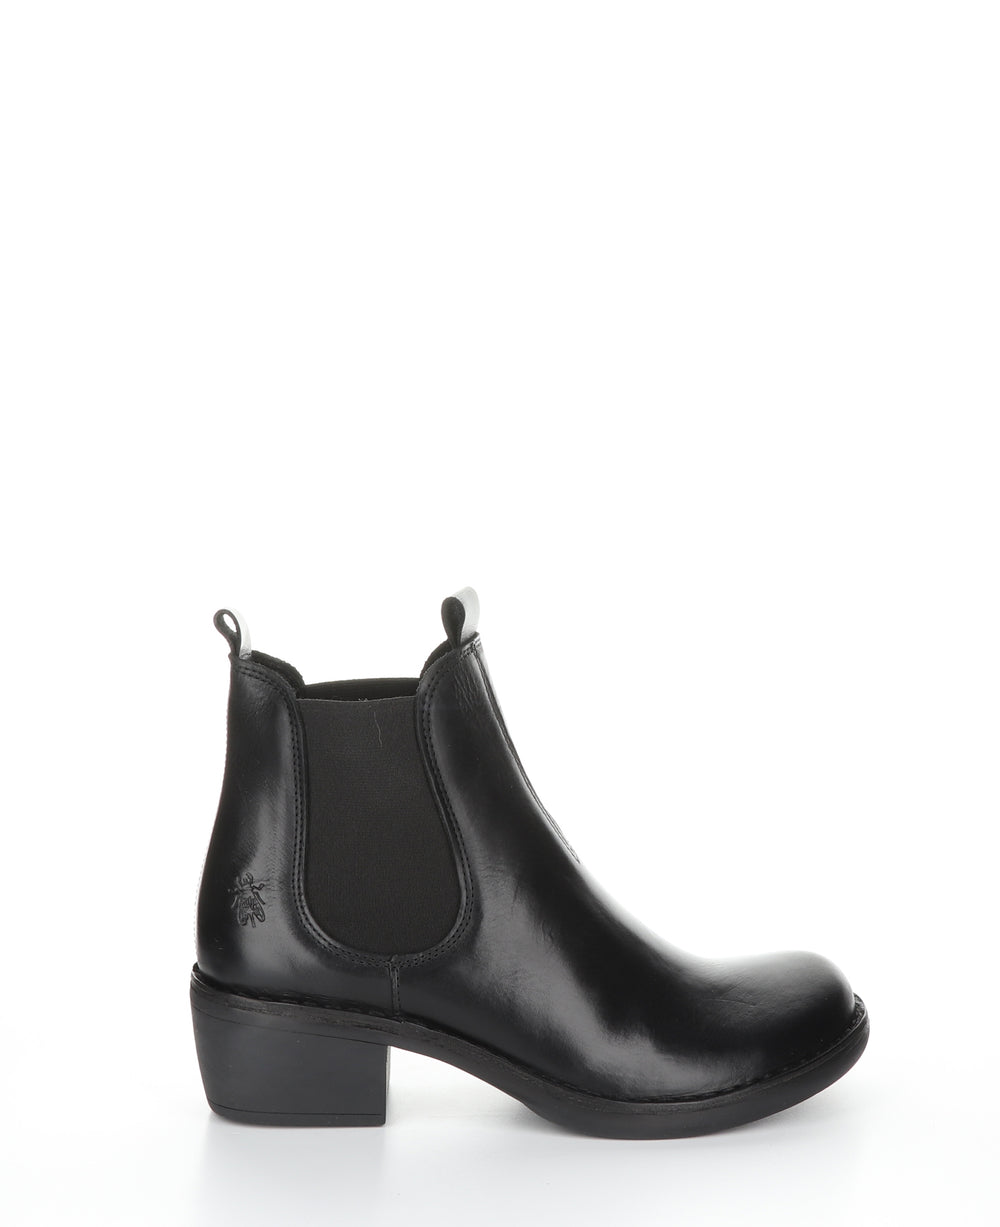 MEME030FLY Black Round Toe Ankle Boots